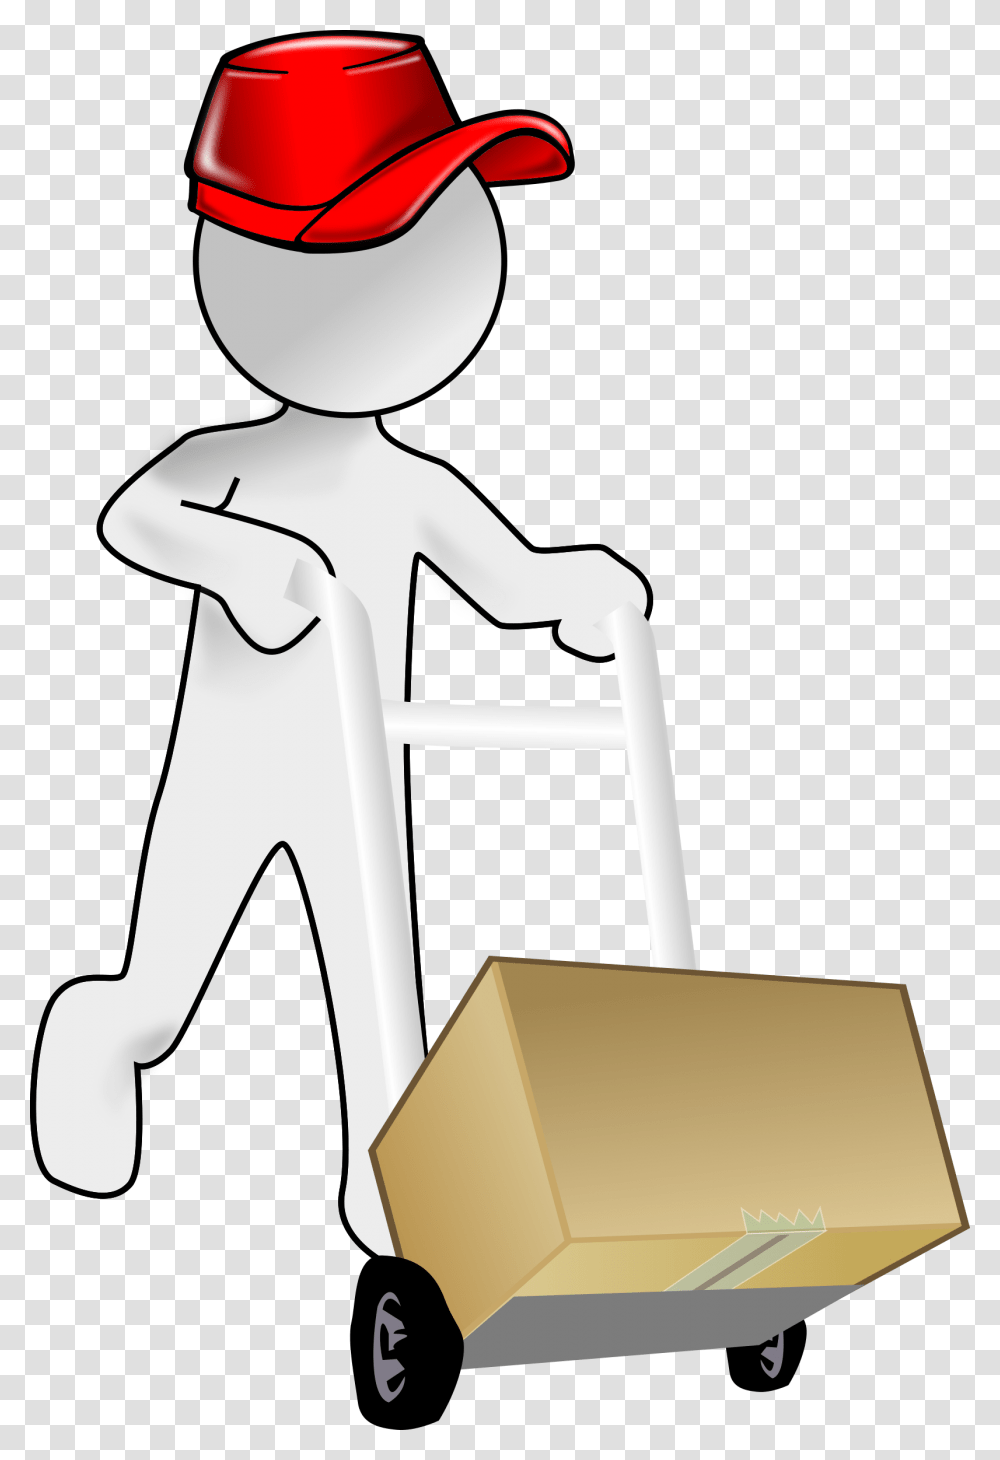 Bubble Person Carrying A Packet Using A Crate Clip Red Cap Clip Art, Bag, Shopping Bag Transparent Png